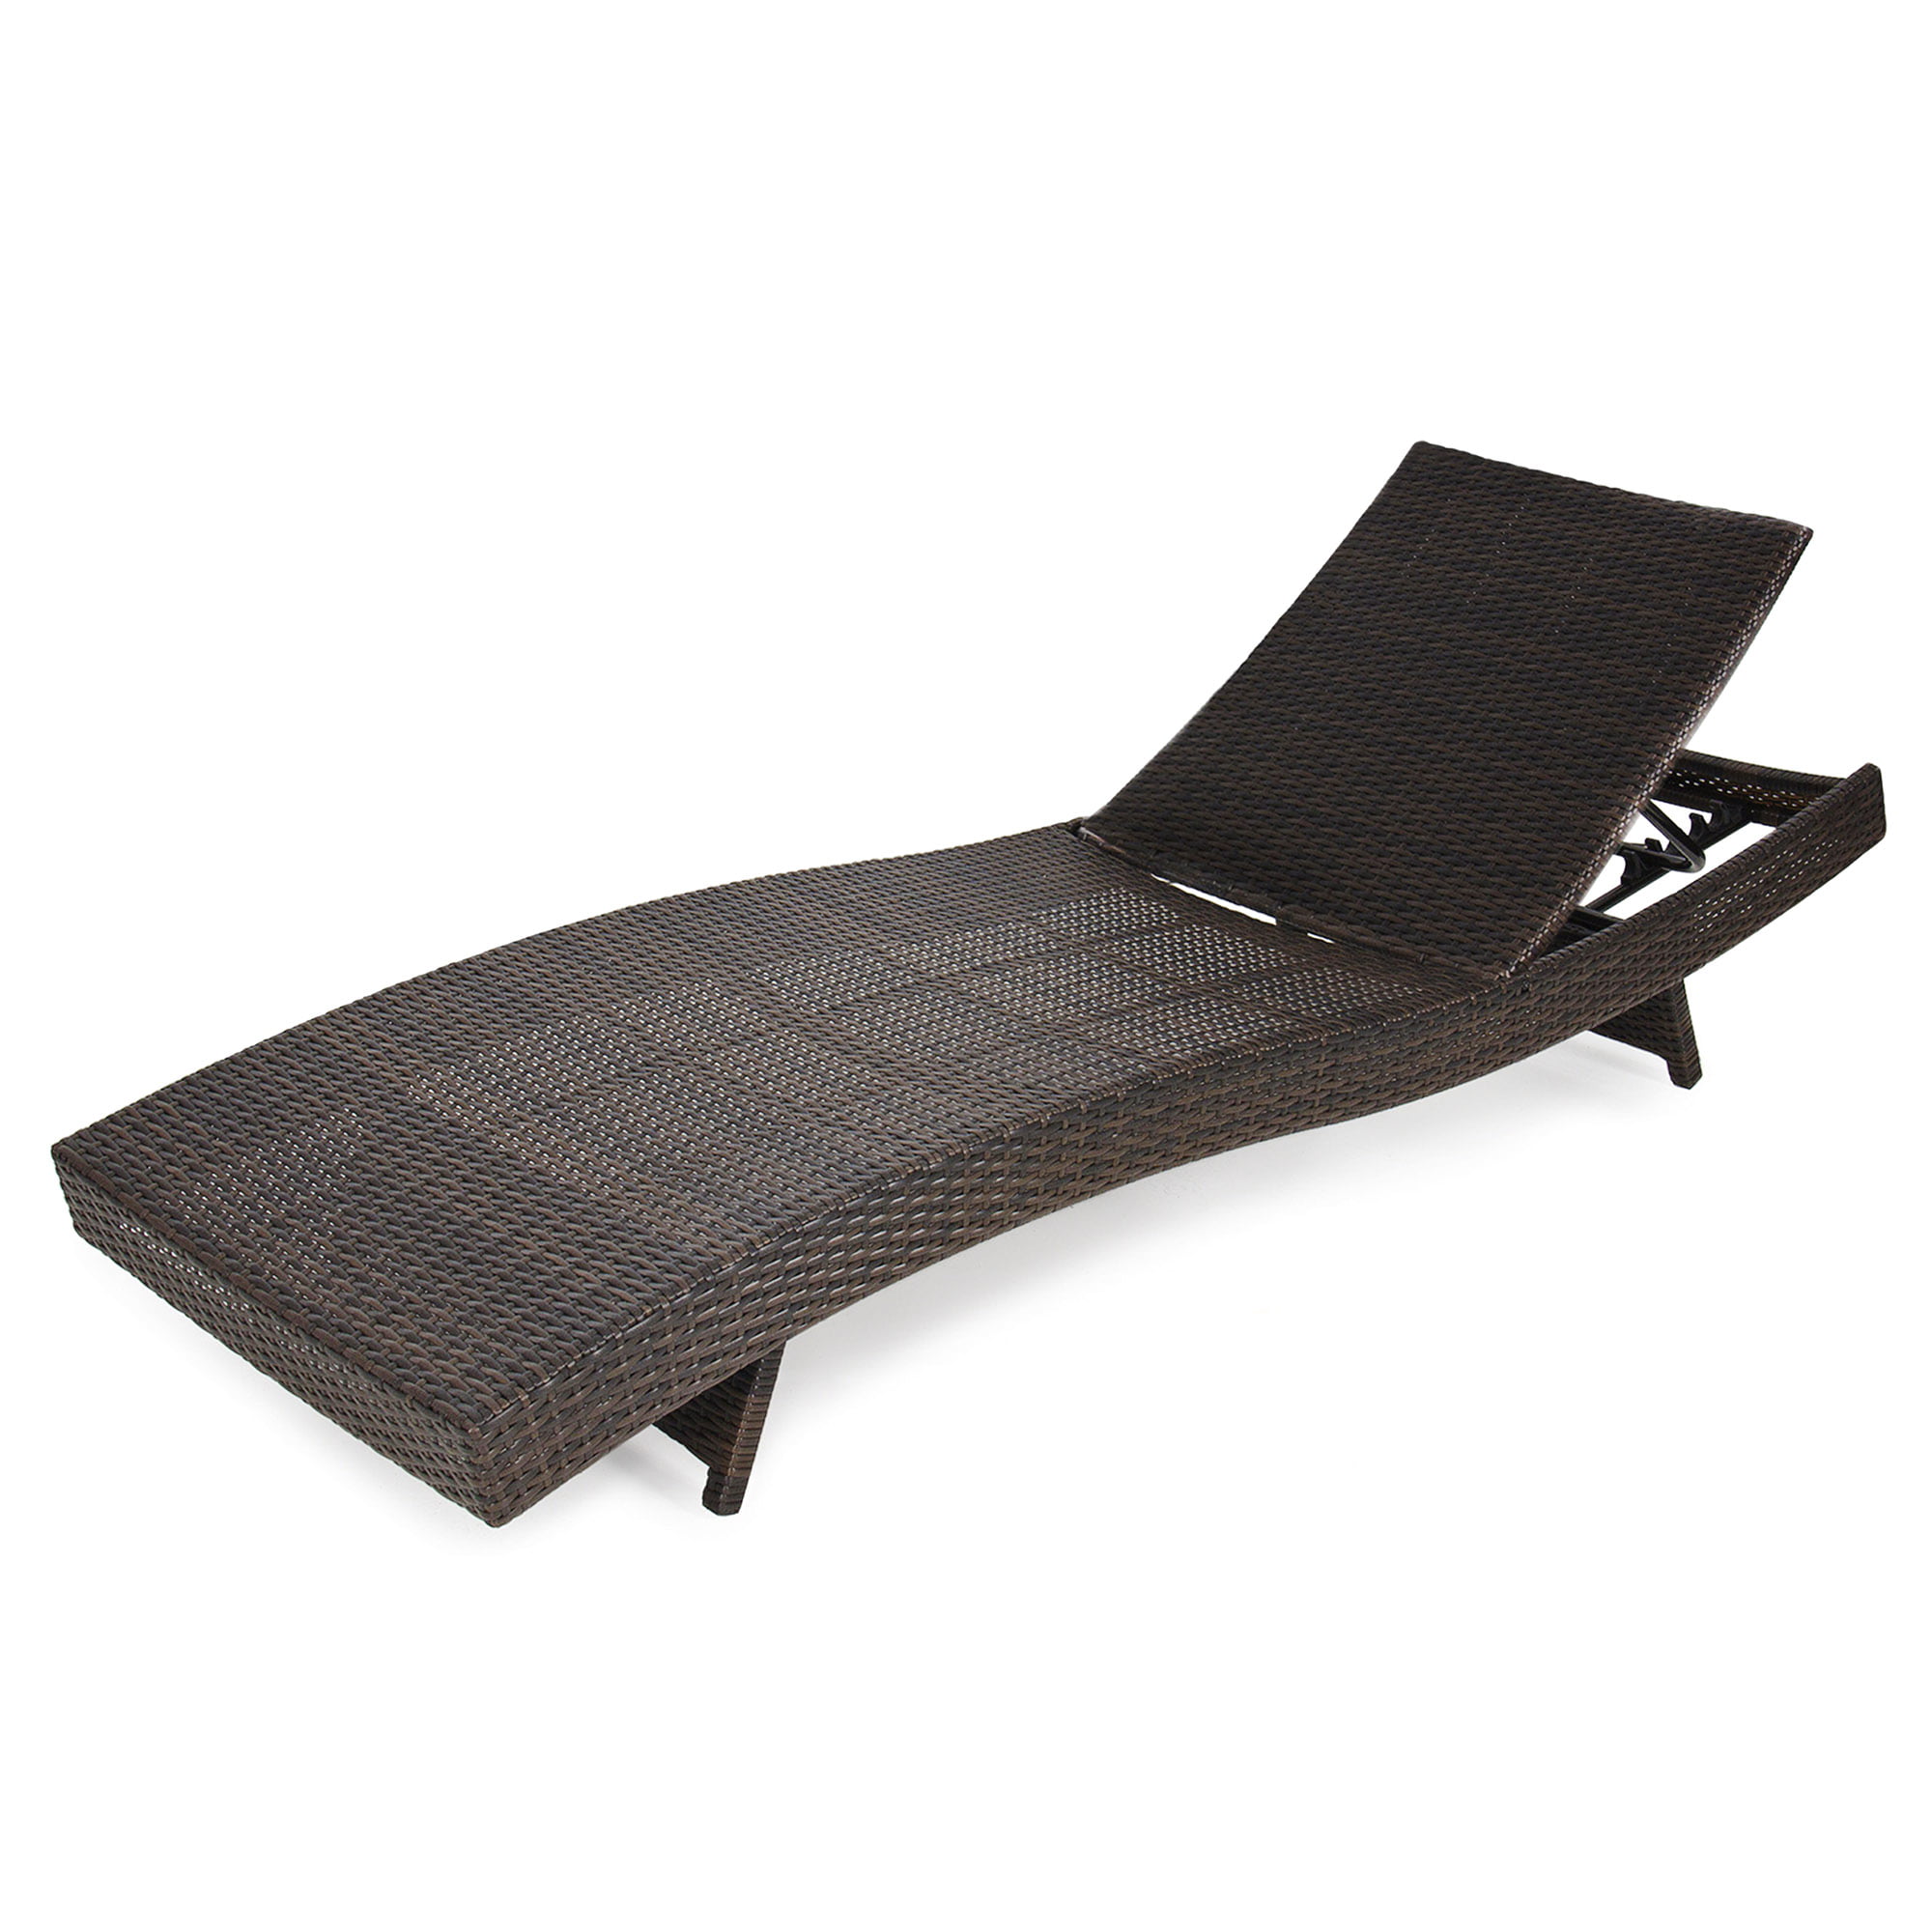 Best Choice Products Adjustable Modern Wicker Chaise Lounge Chair